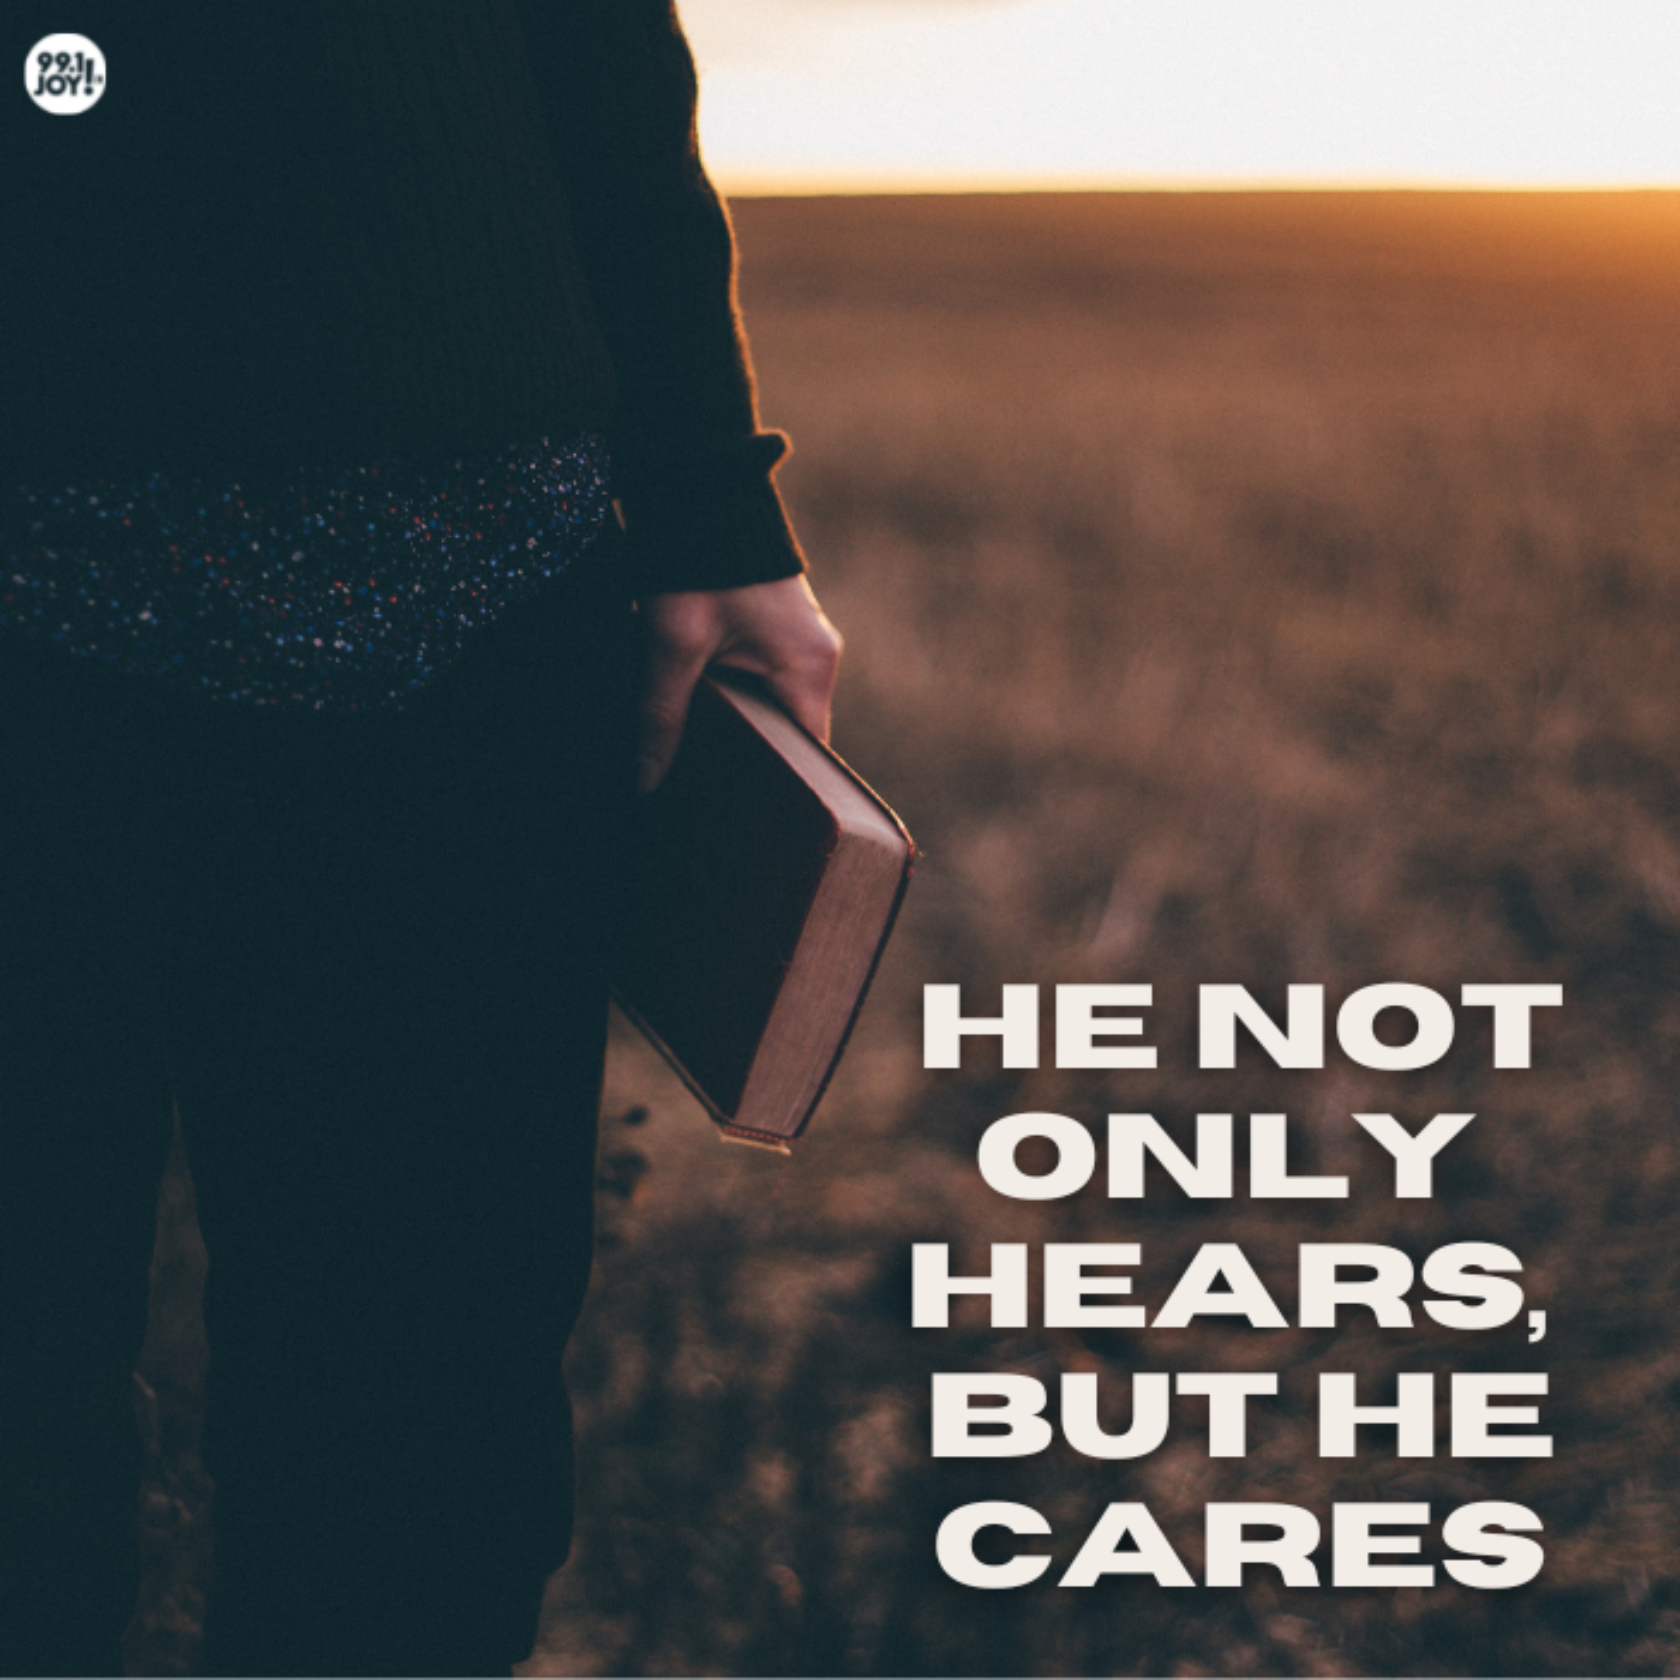 He Not Only Hears, But He Cares